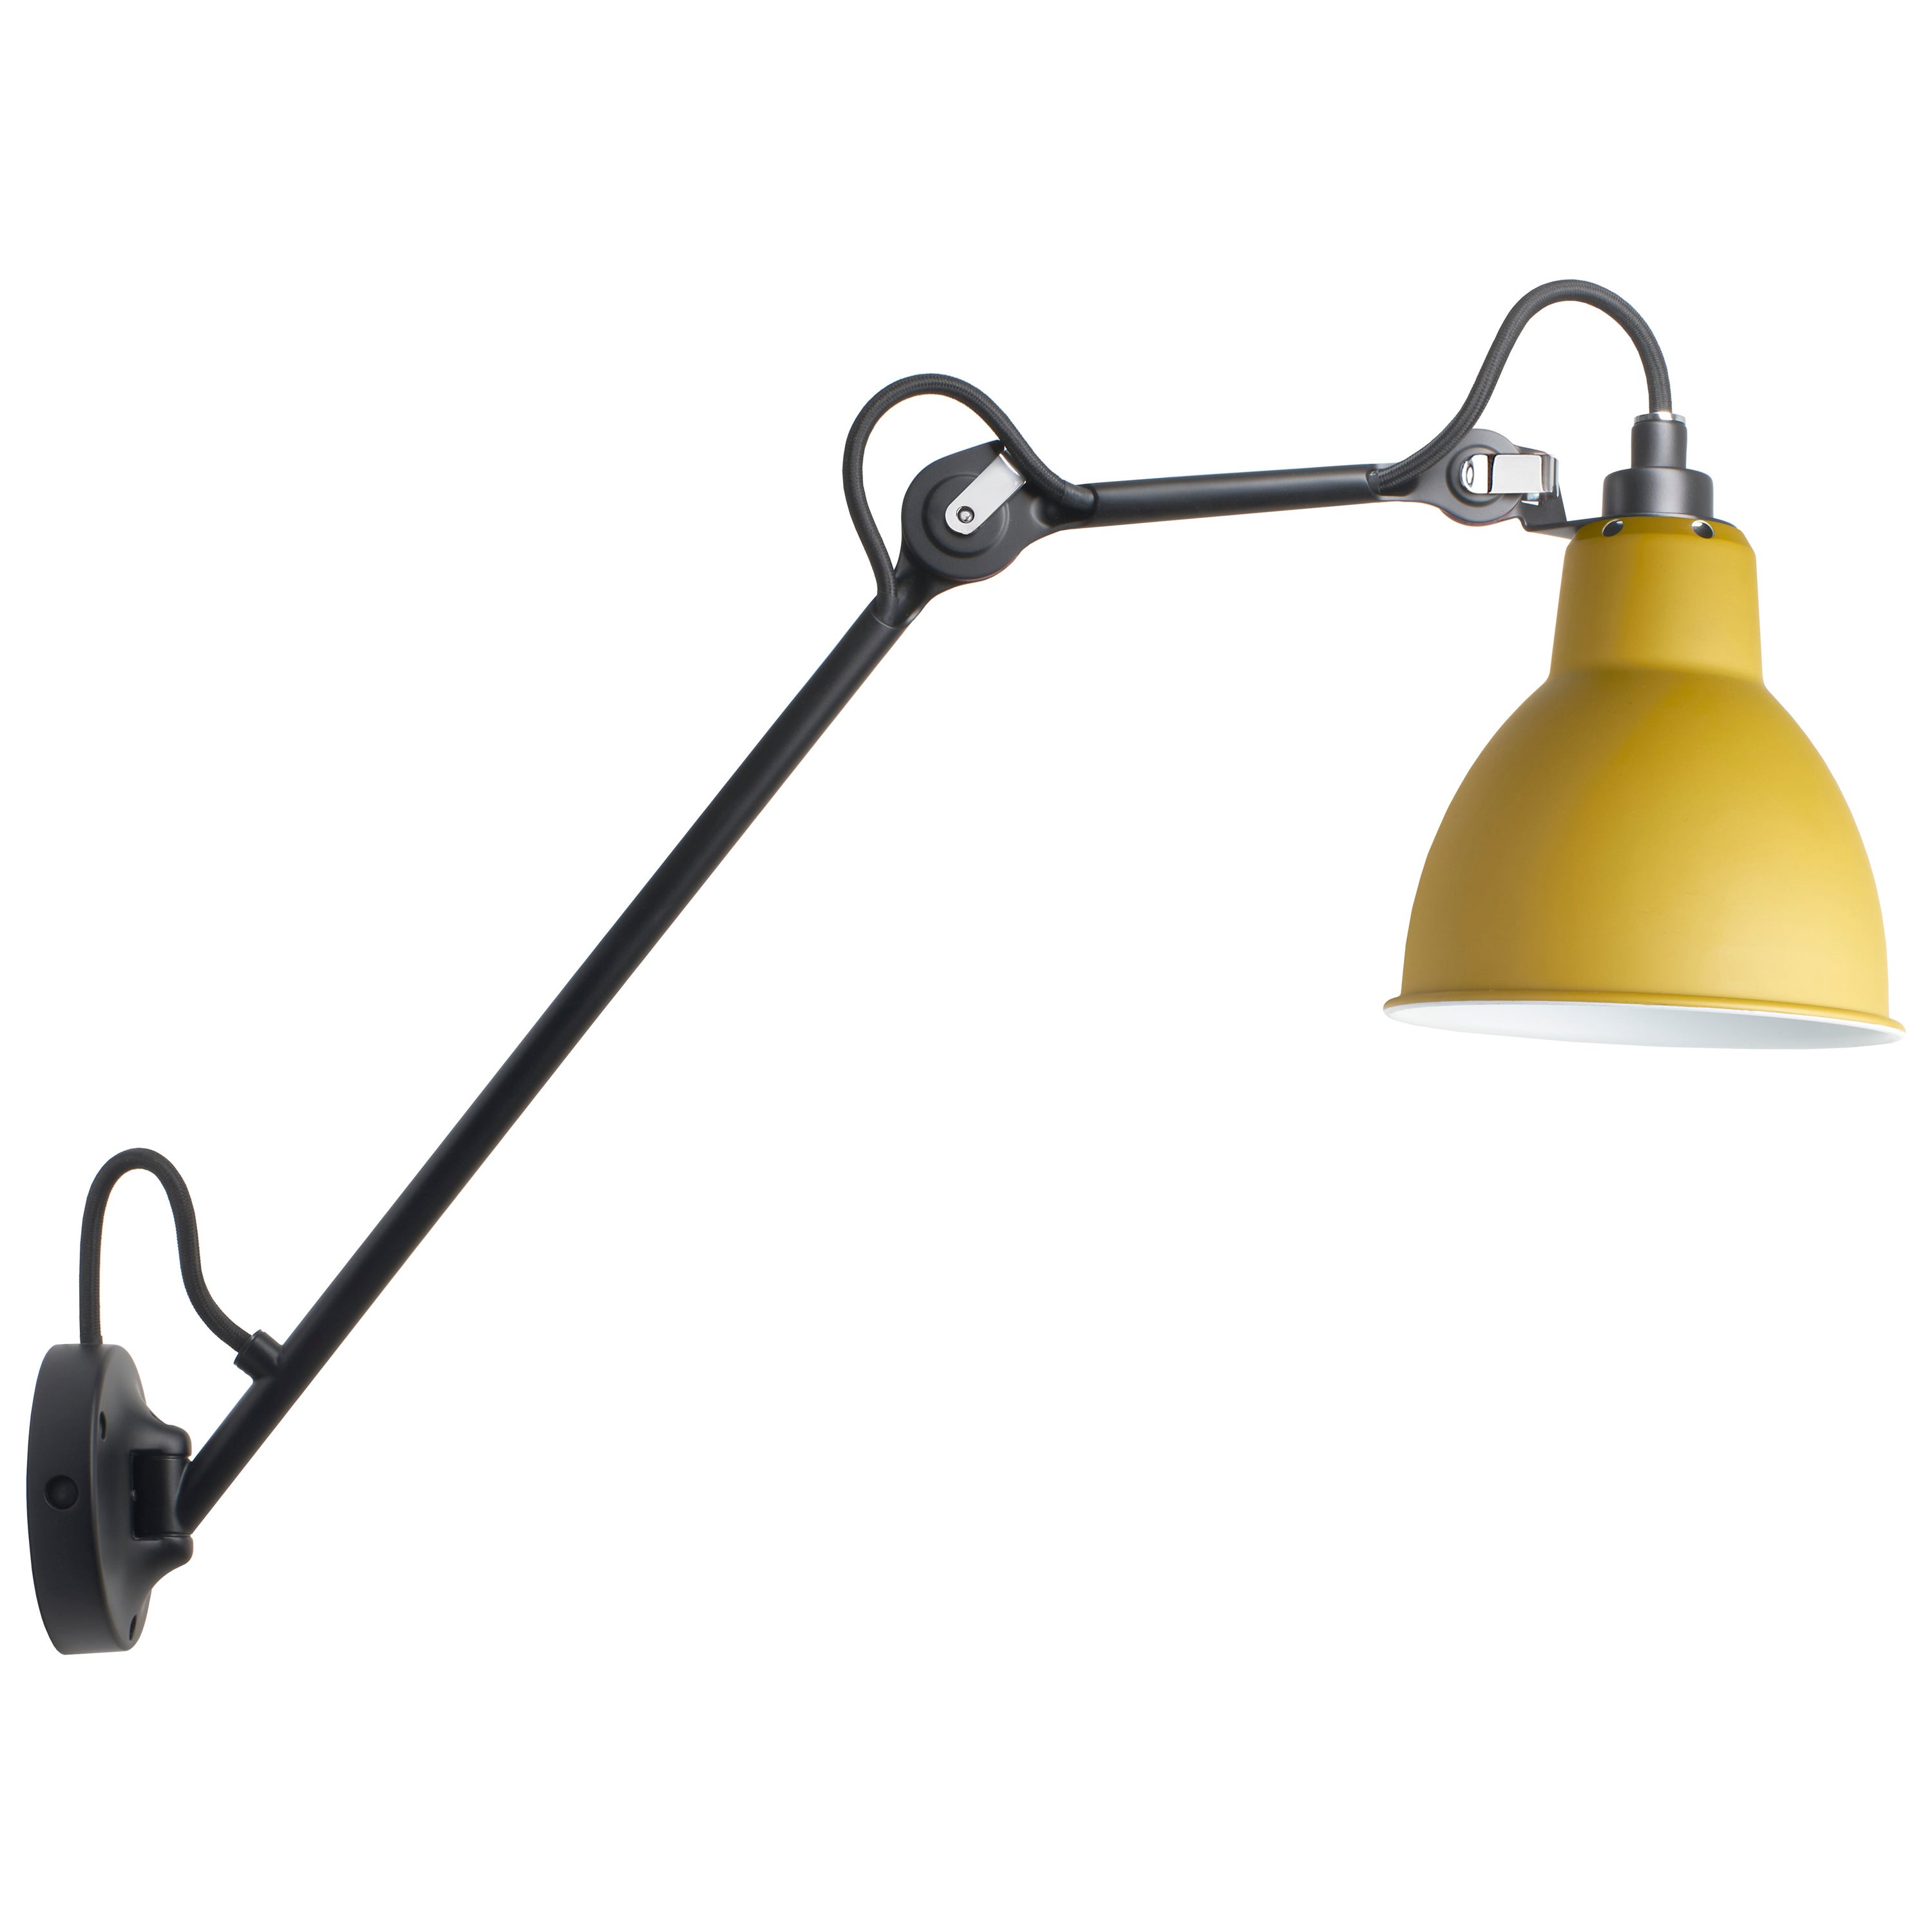 DCW Editions La Lampe Gras N°122 Wall Lamp in Black Arm and Yellow Shade